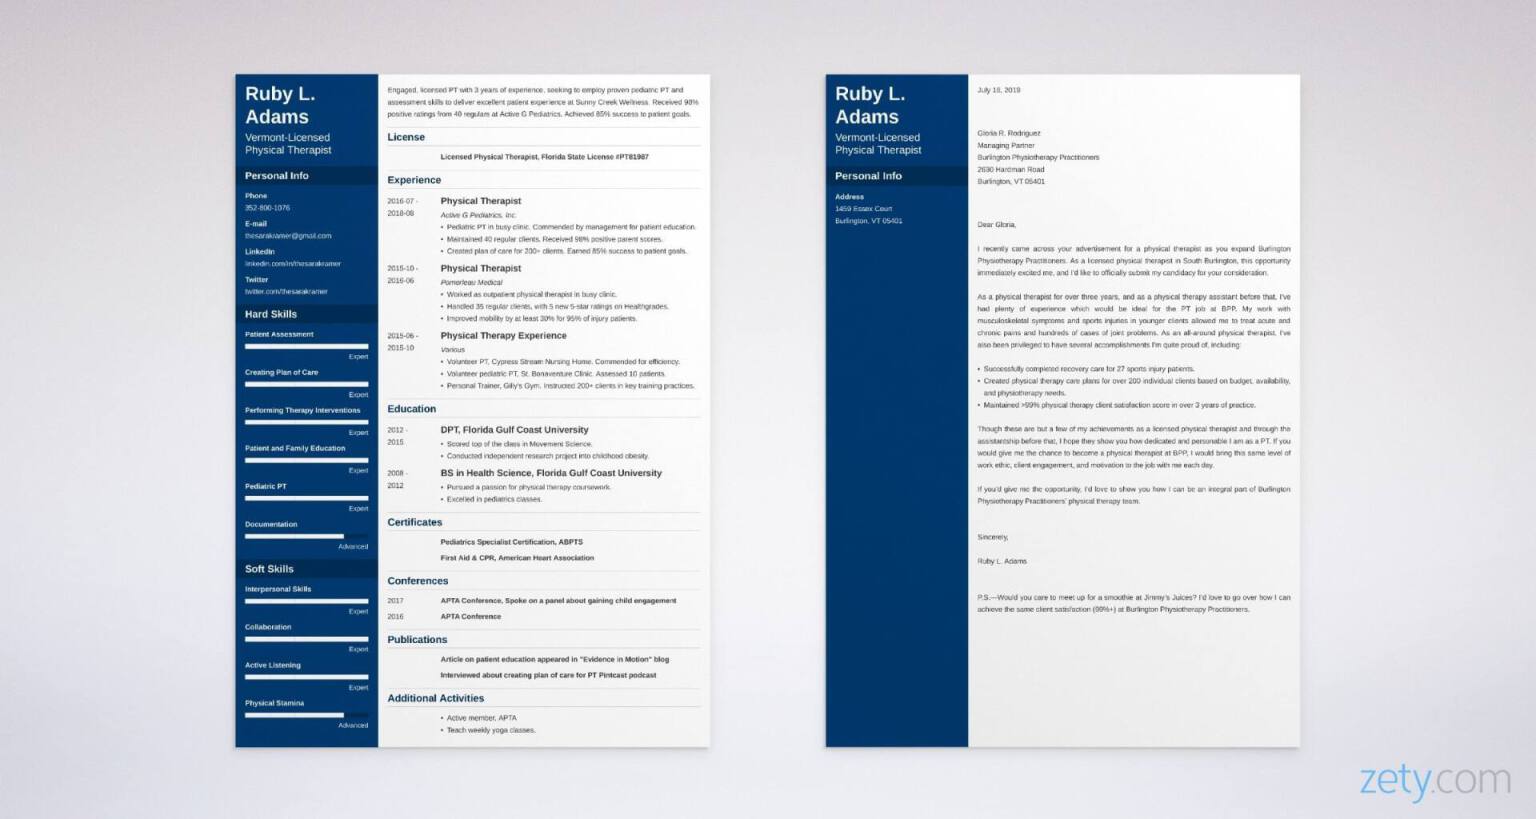 physical therapy resume and cover letter set